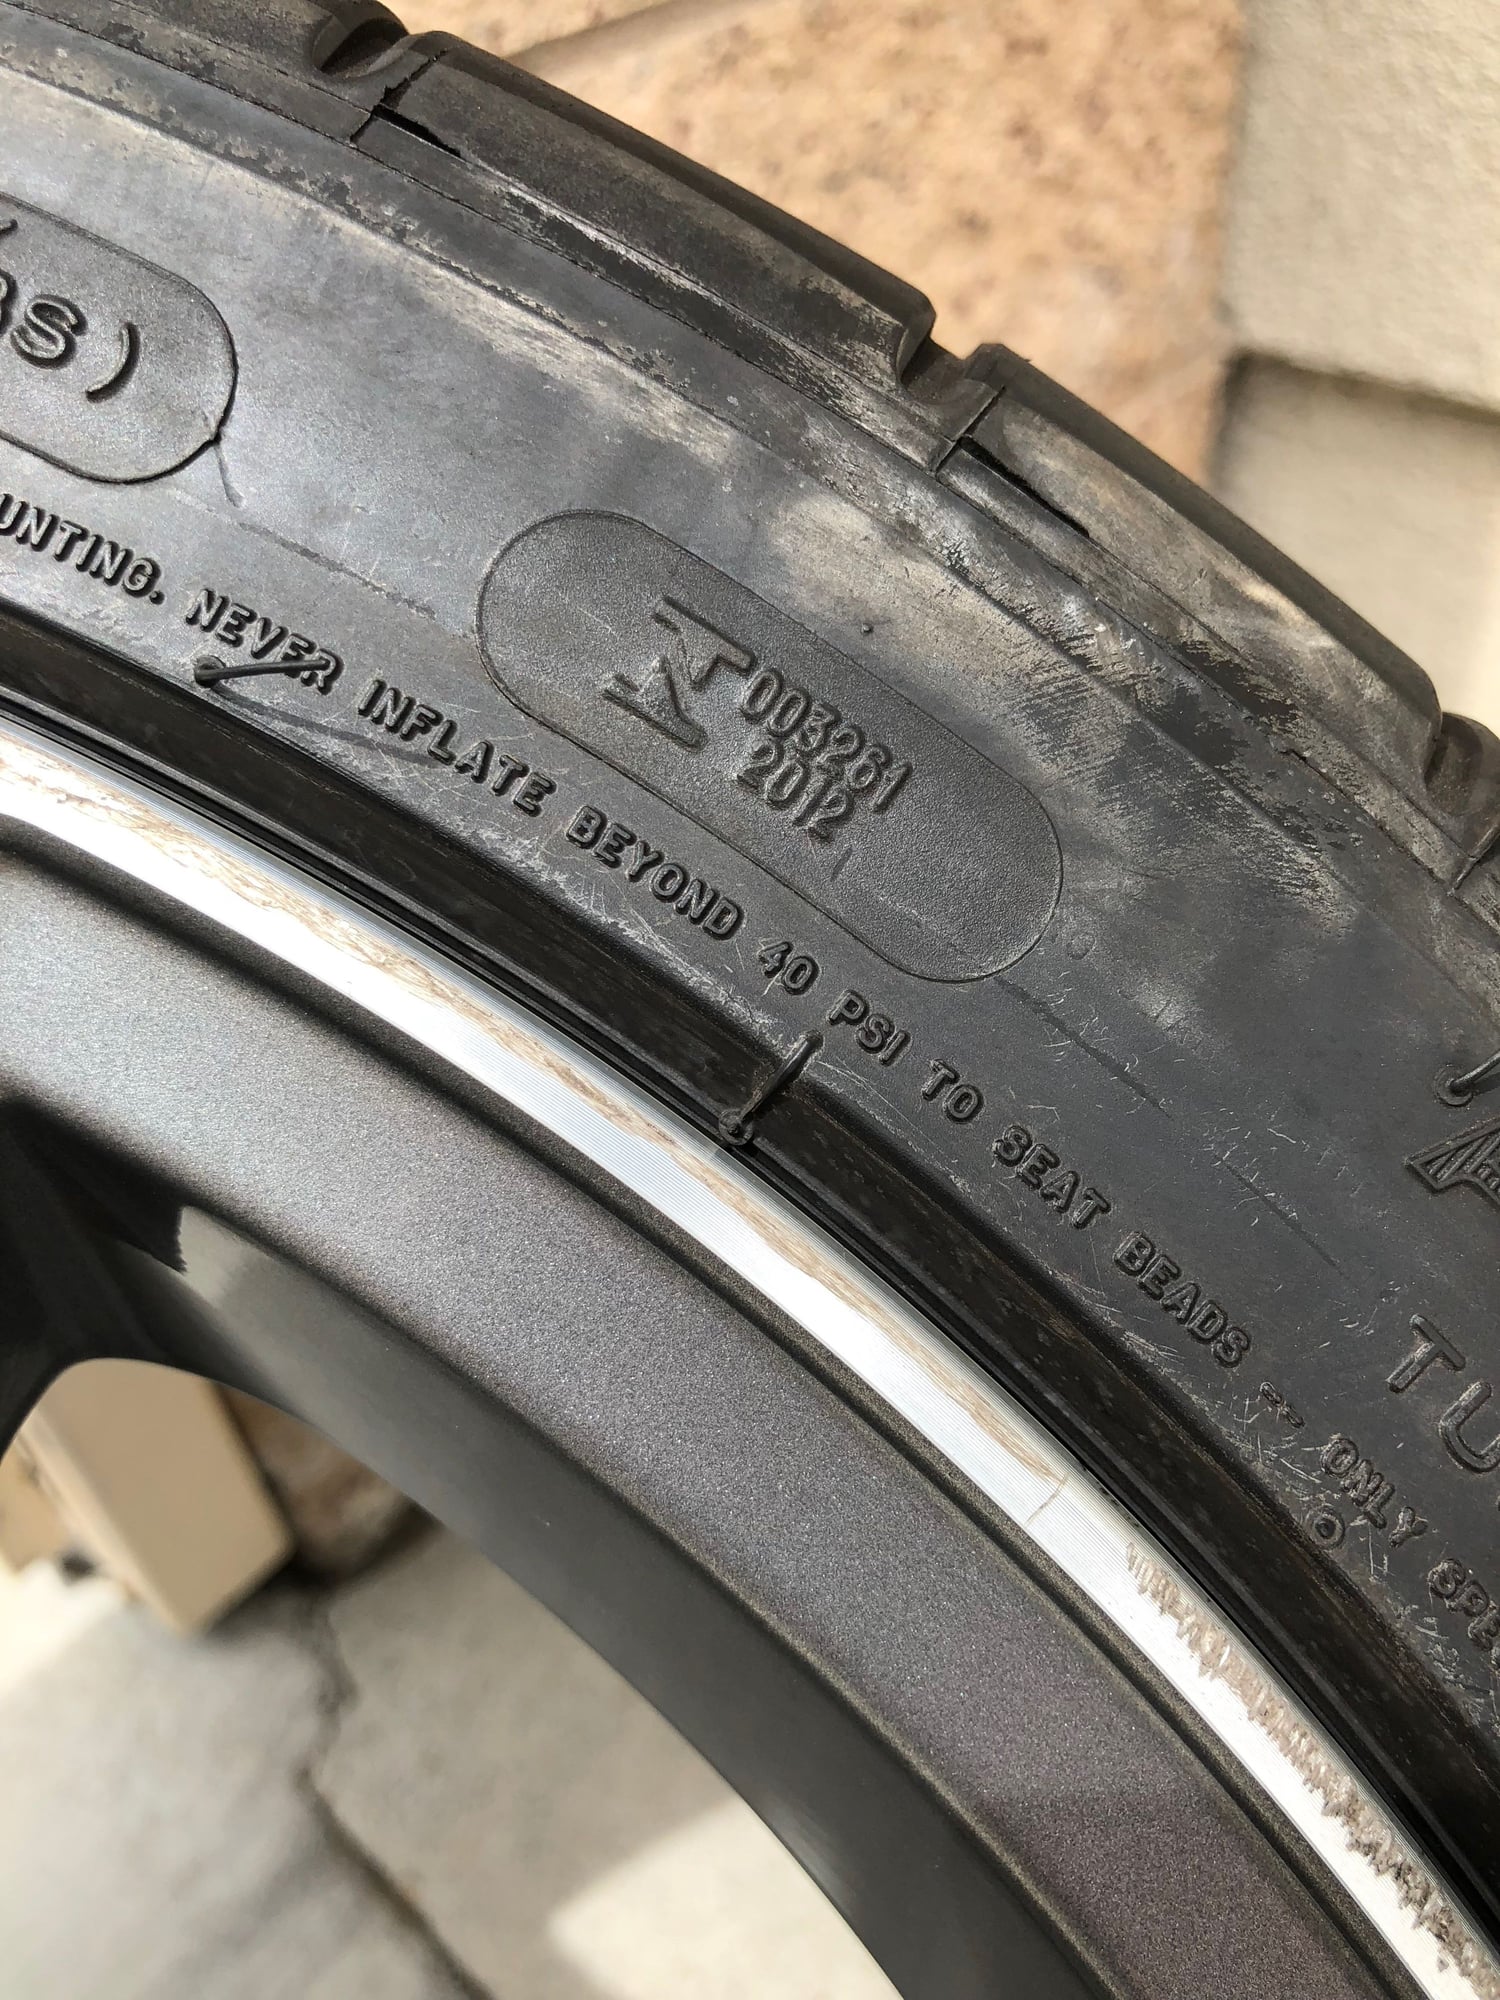 Wheels and Tires/Axles - OEM 18" C63 AMG 5 SPOKE WHEELS w/ TPMS and Michelin PSS - Used - 2009 to 2015 Mercedes-Benz C36 AMG - Riverside, CA 92507, United States